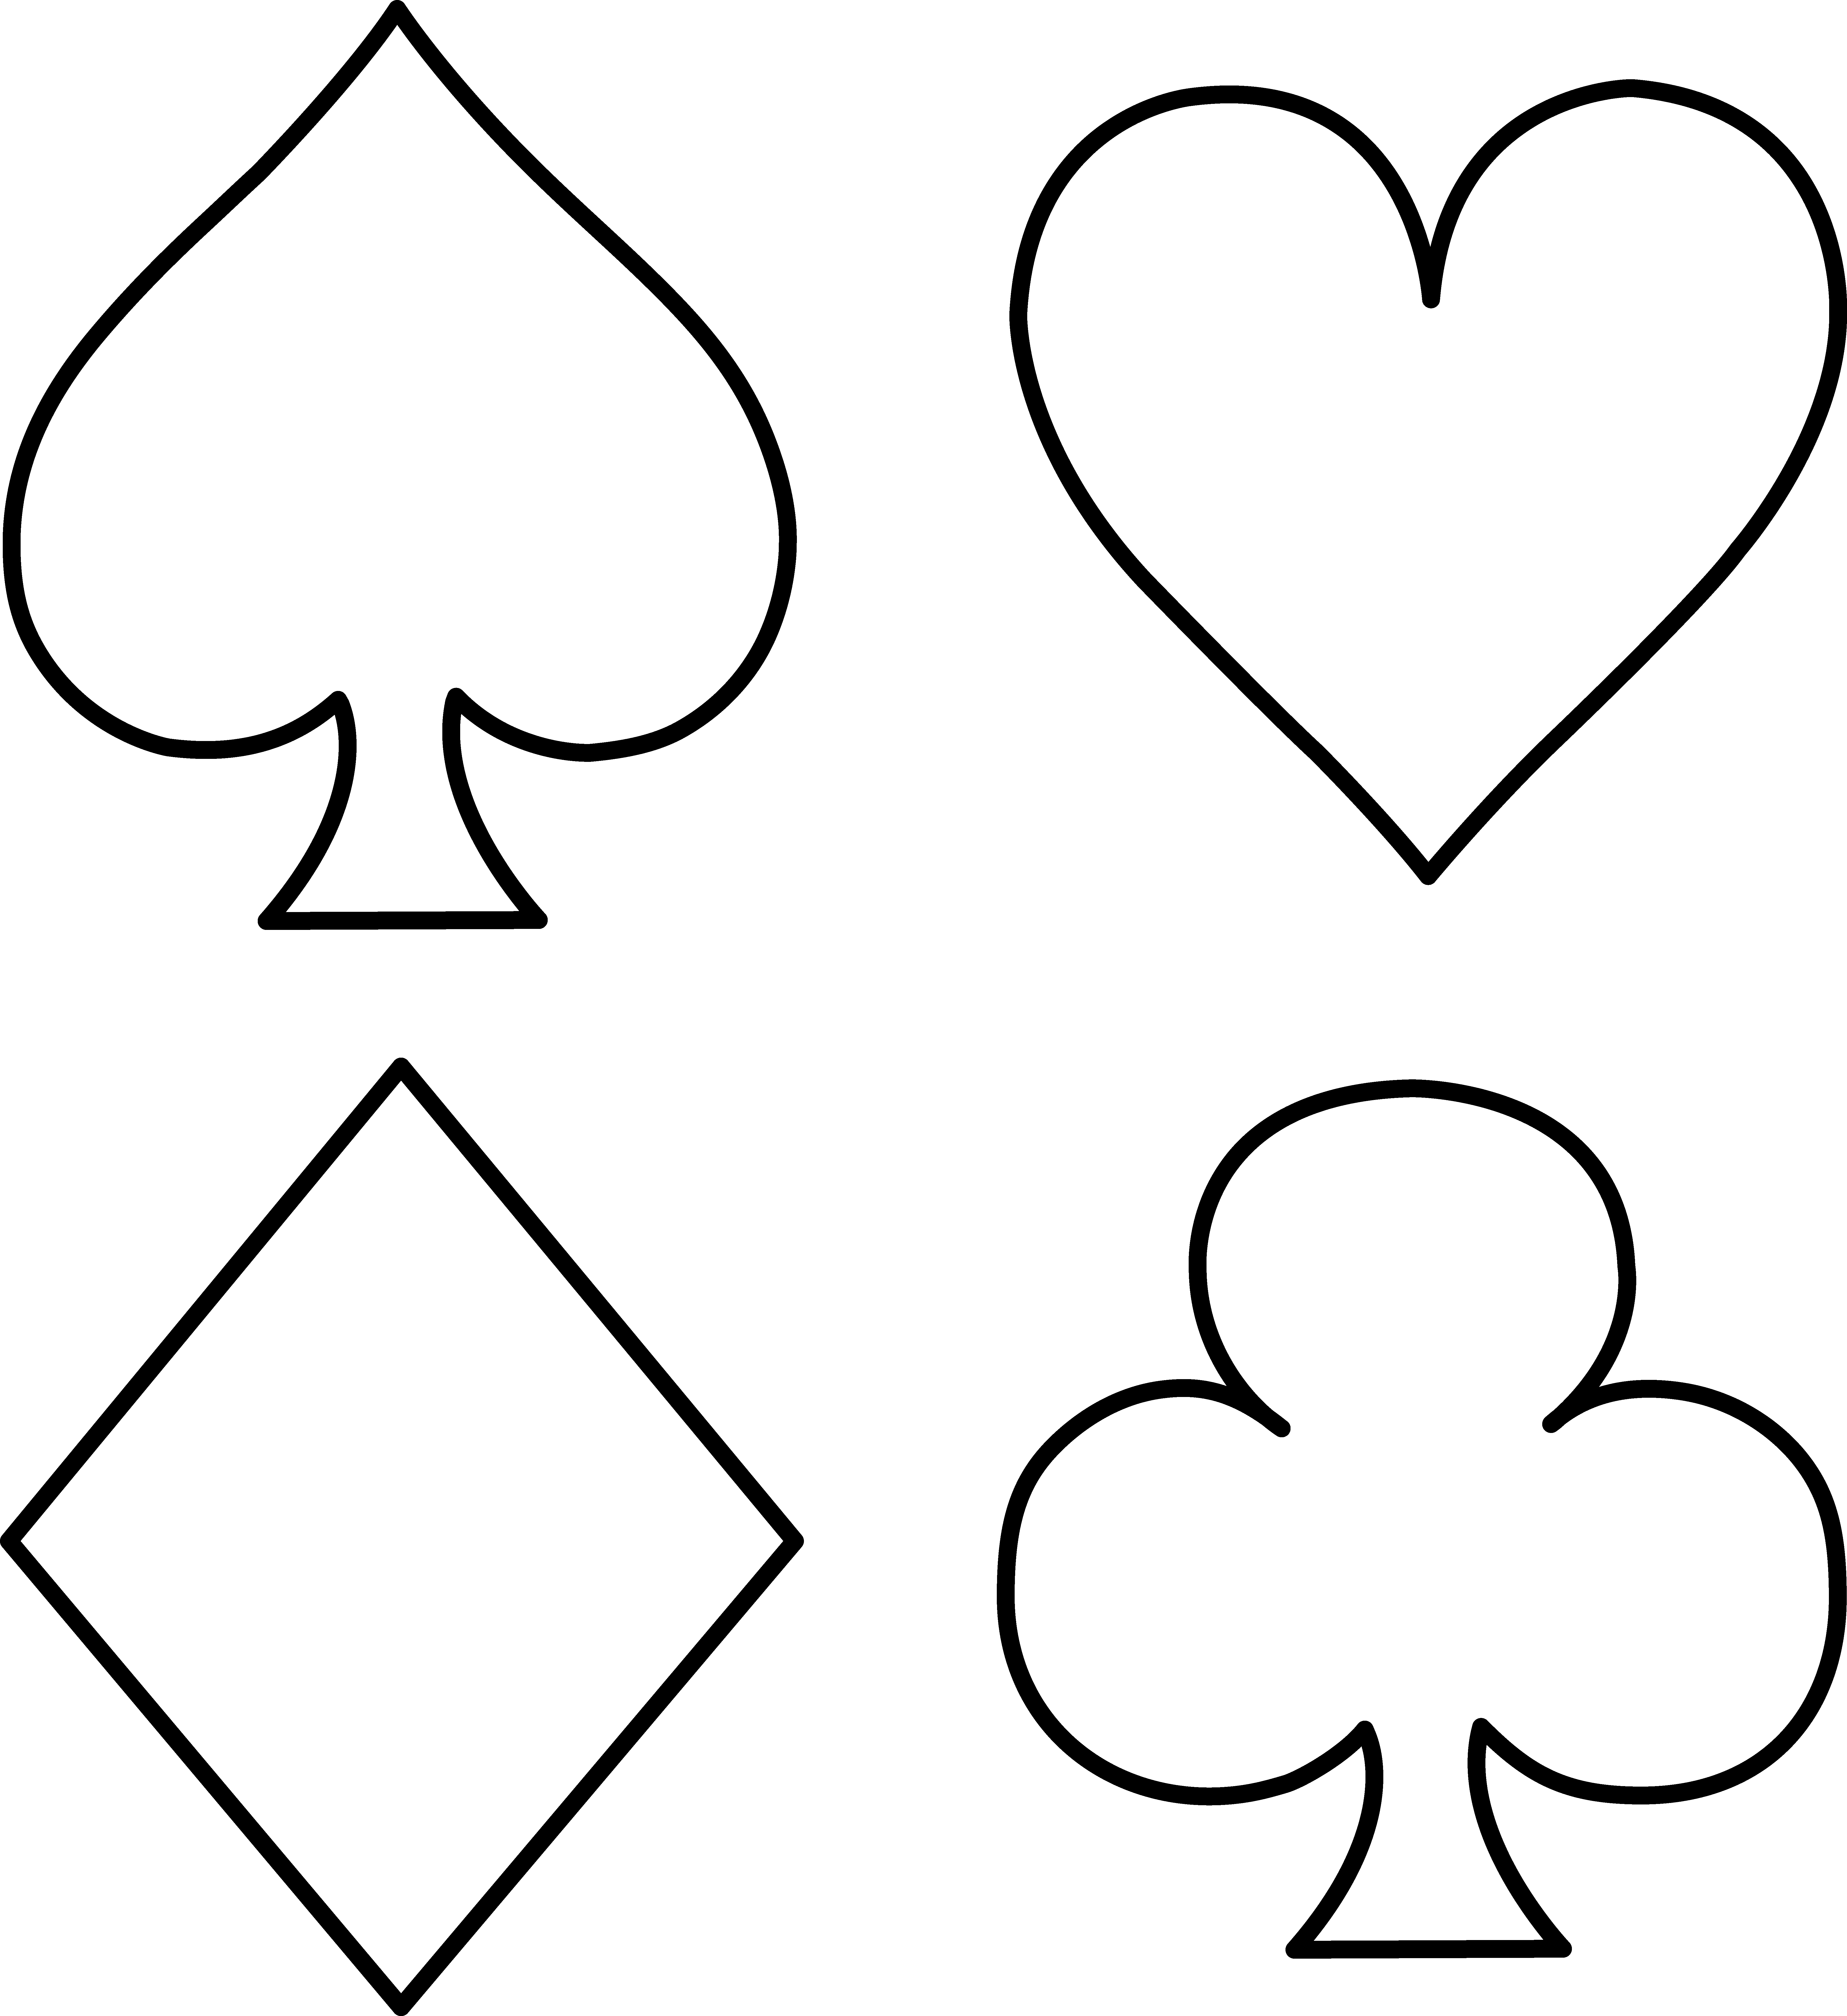 Playing Card Suits Line Art - Free Clip Art